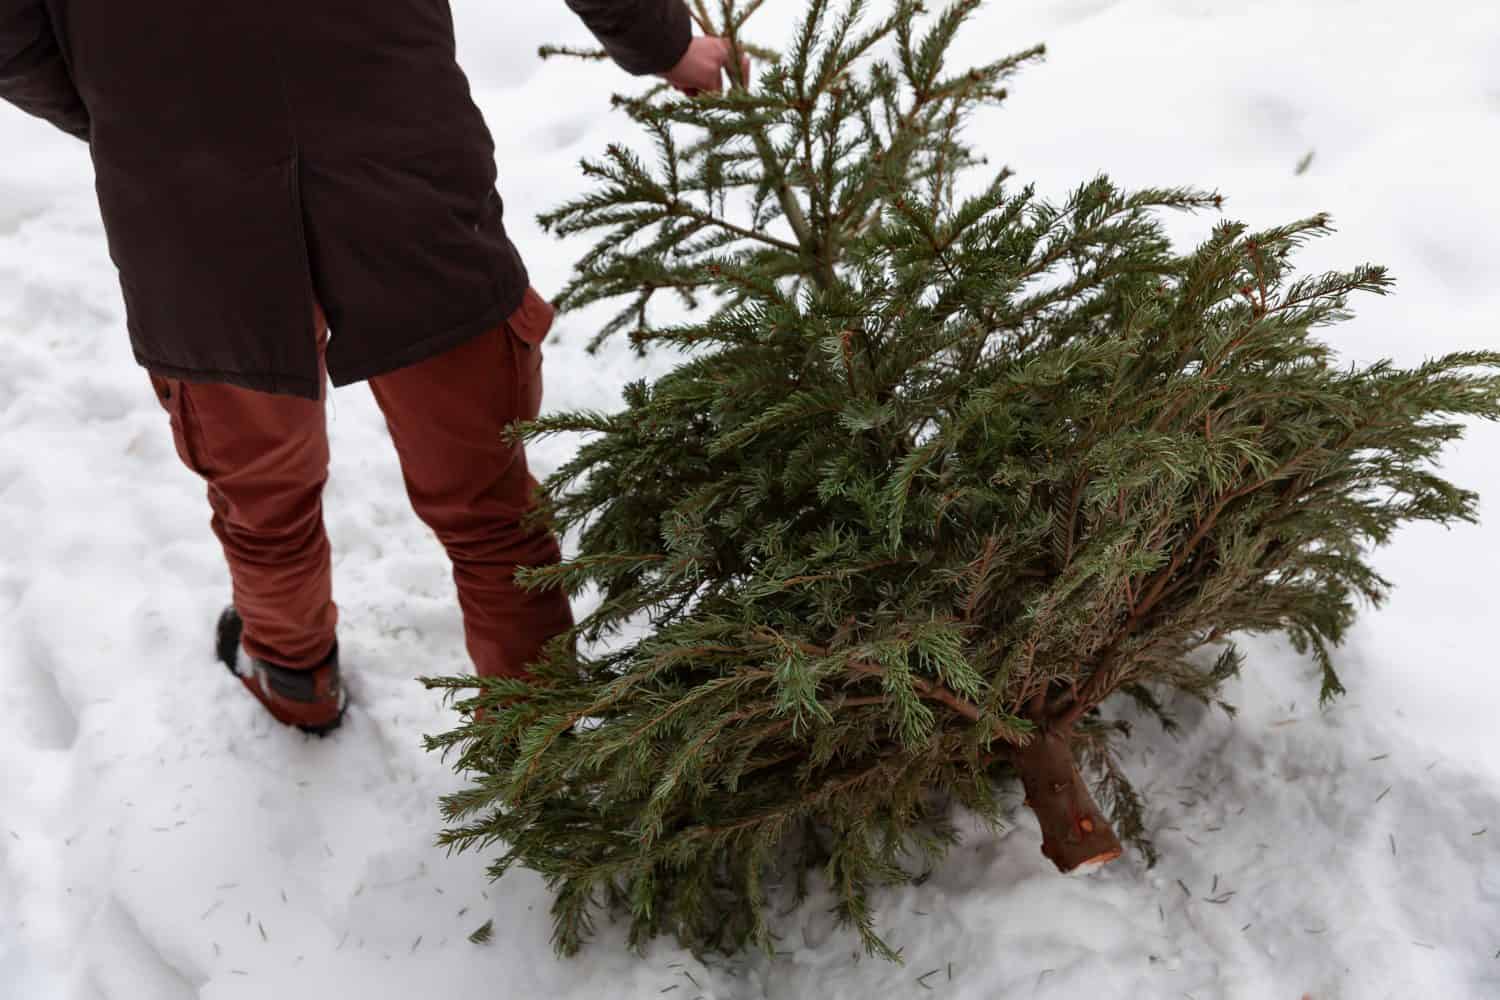 Old Christmas tree recycling, a man carrying a green pine in the trash after Christmas and New year holiday.